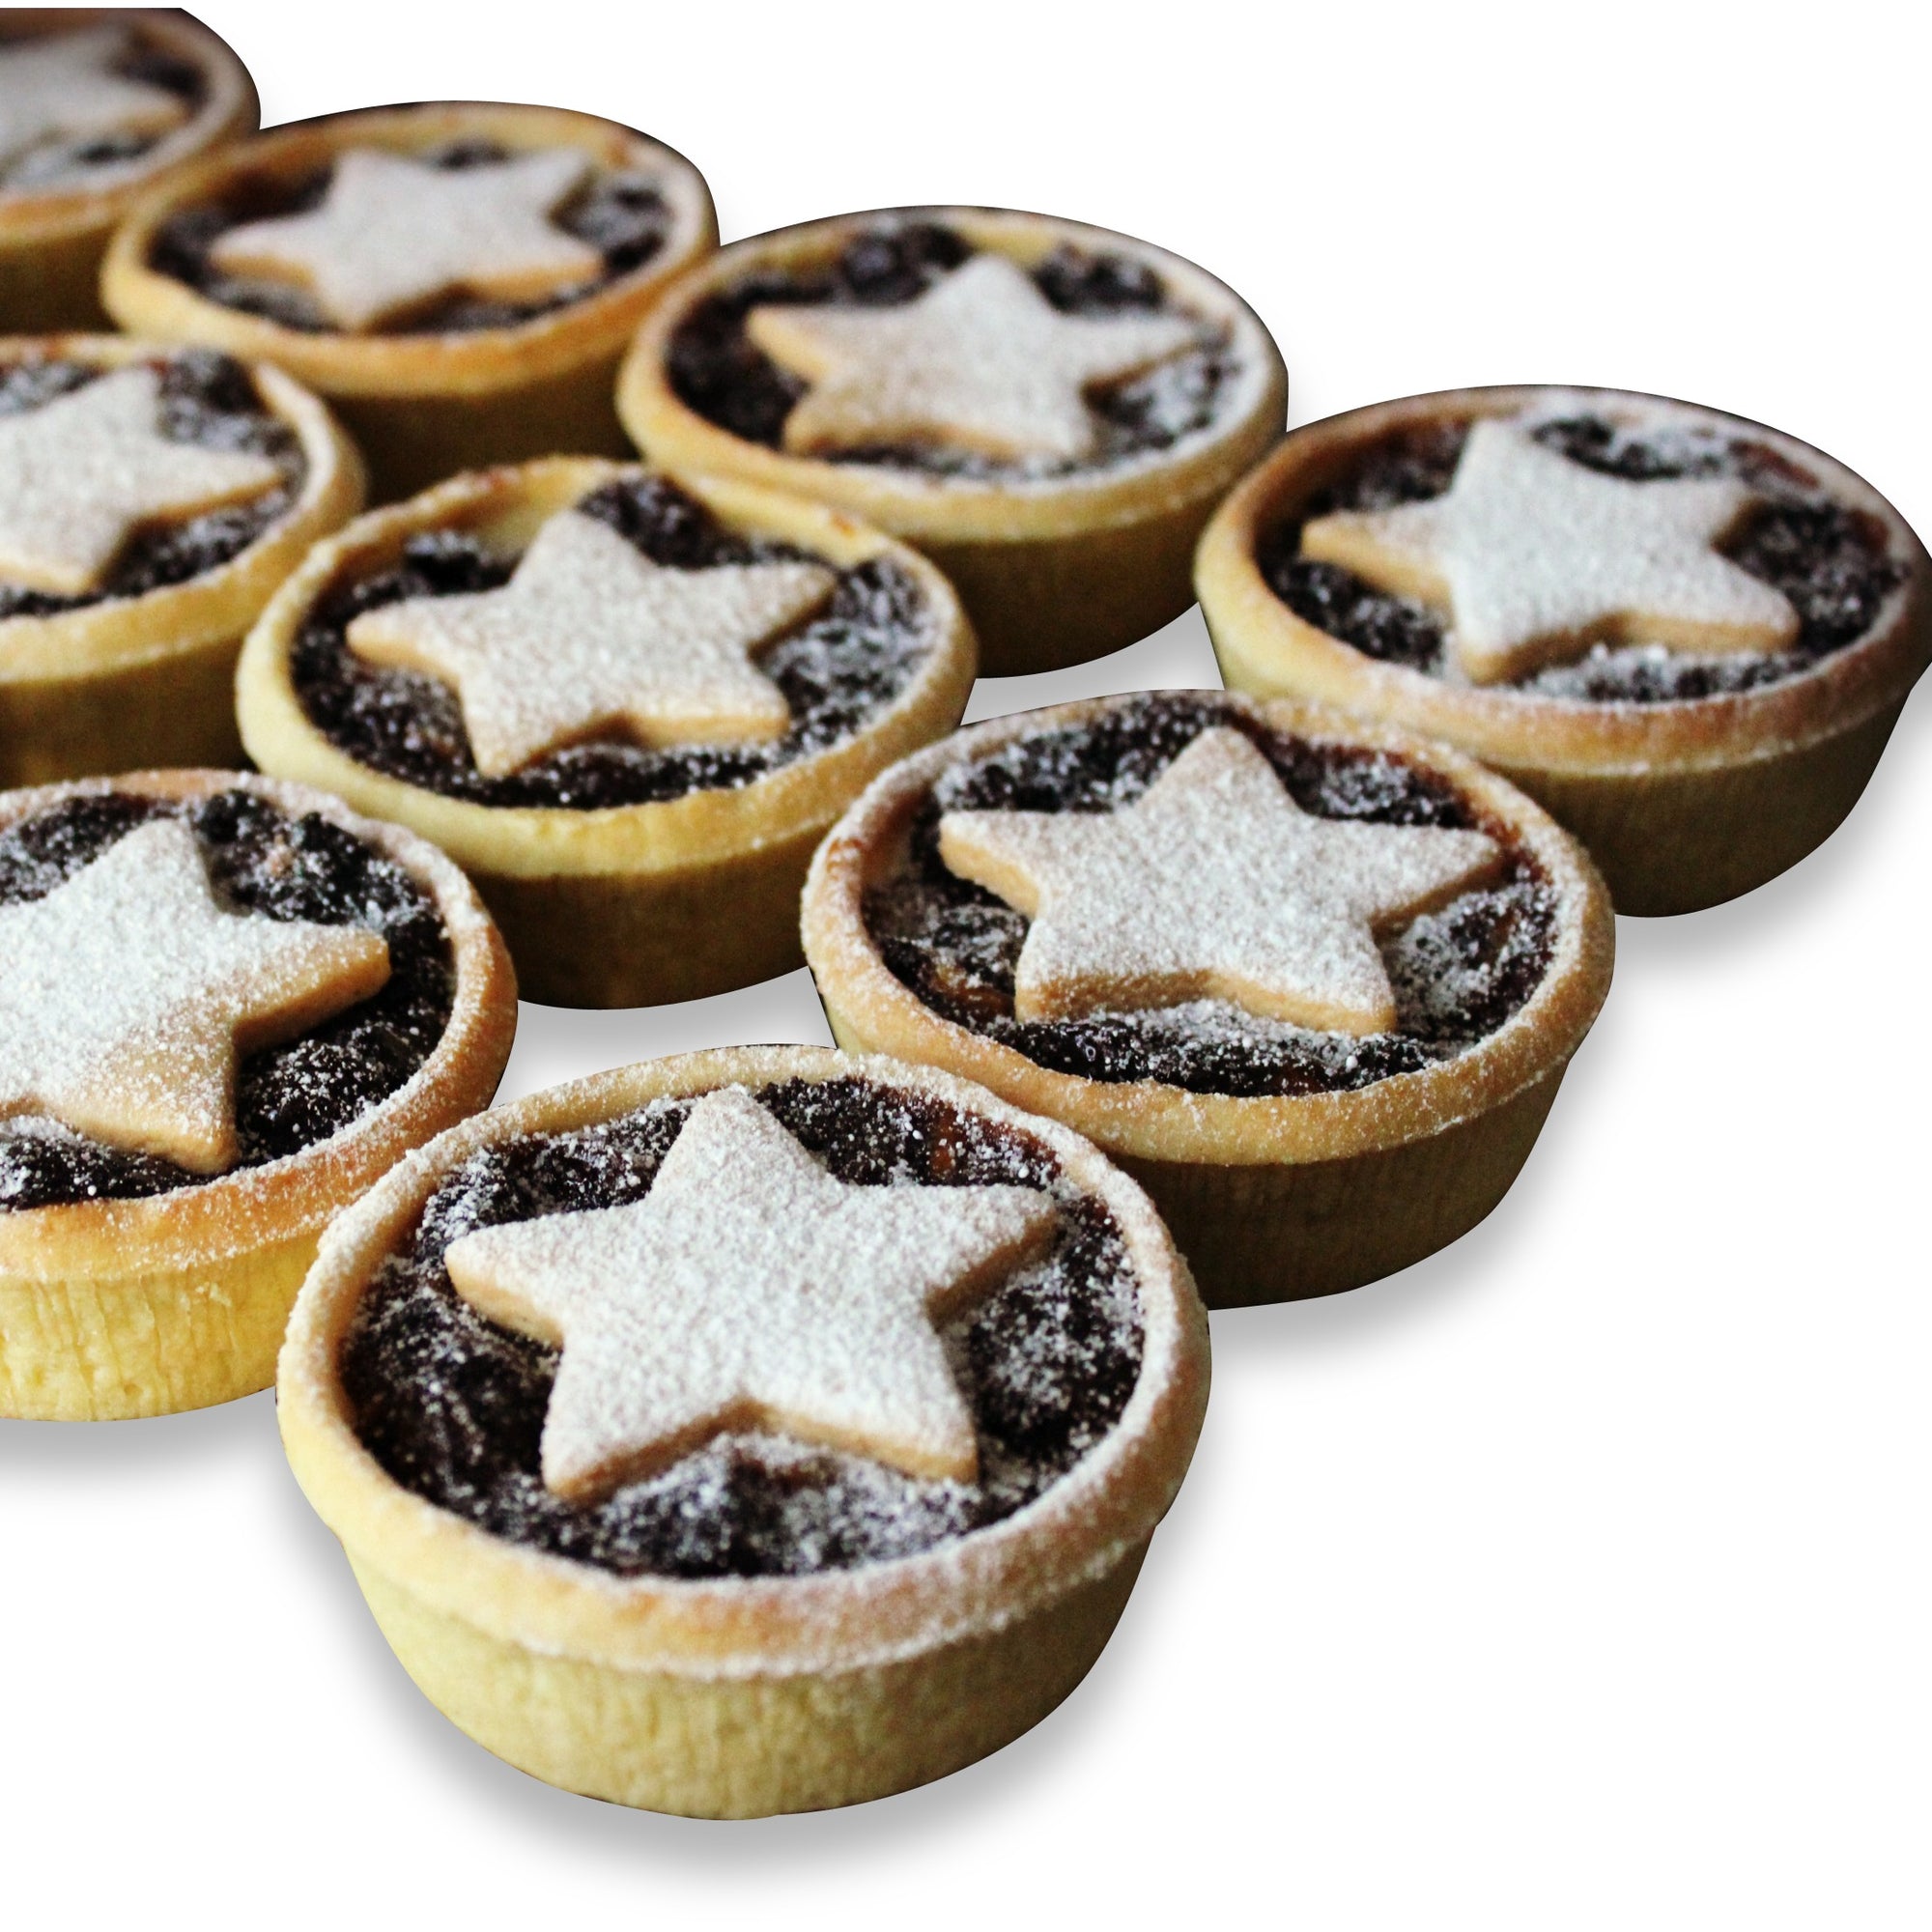 Dello Mano Launches a Christmas Classic: Fruit Mince Pies